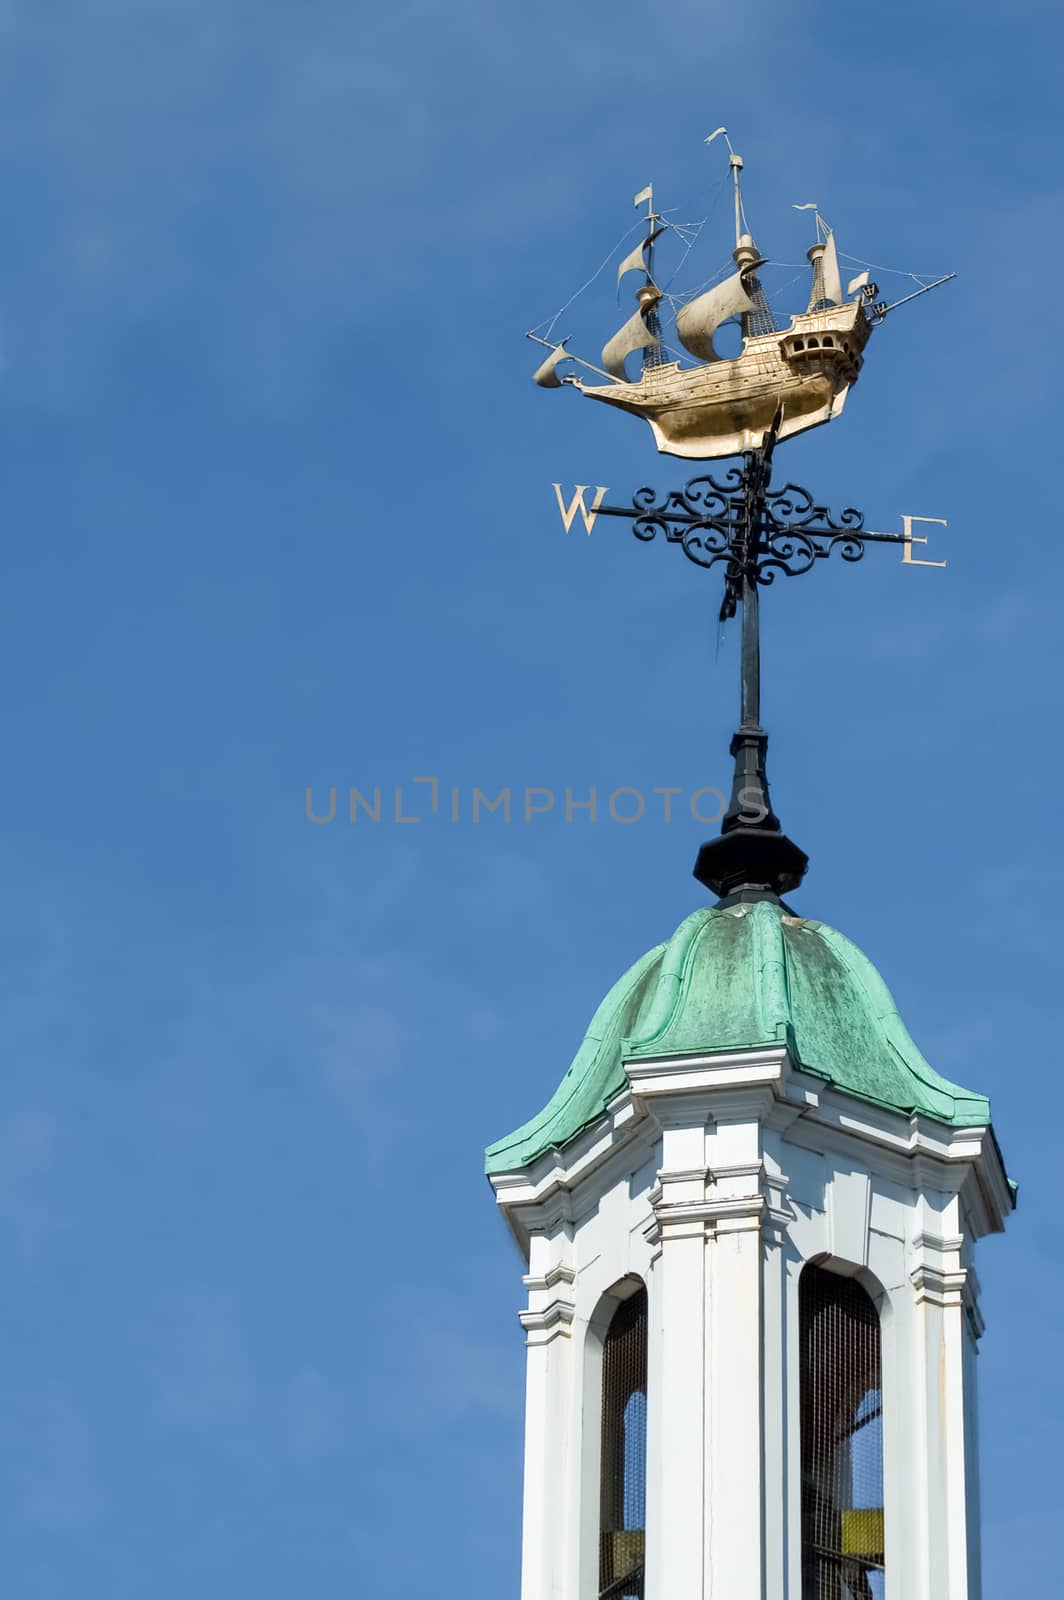 ornate weather vane on top of a bell tower